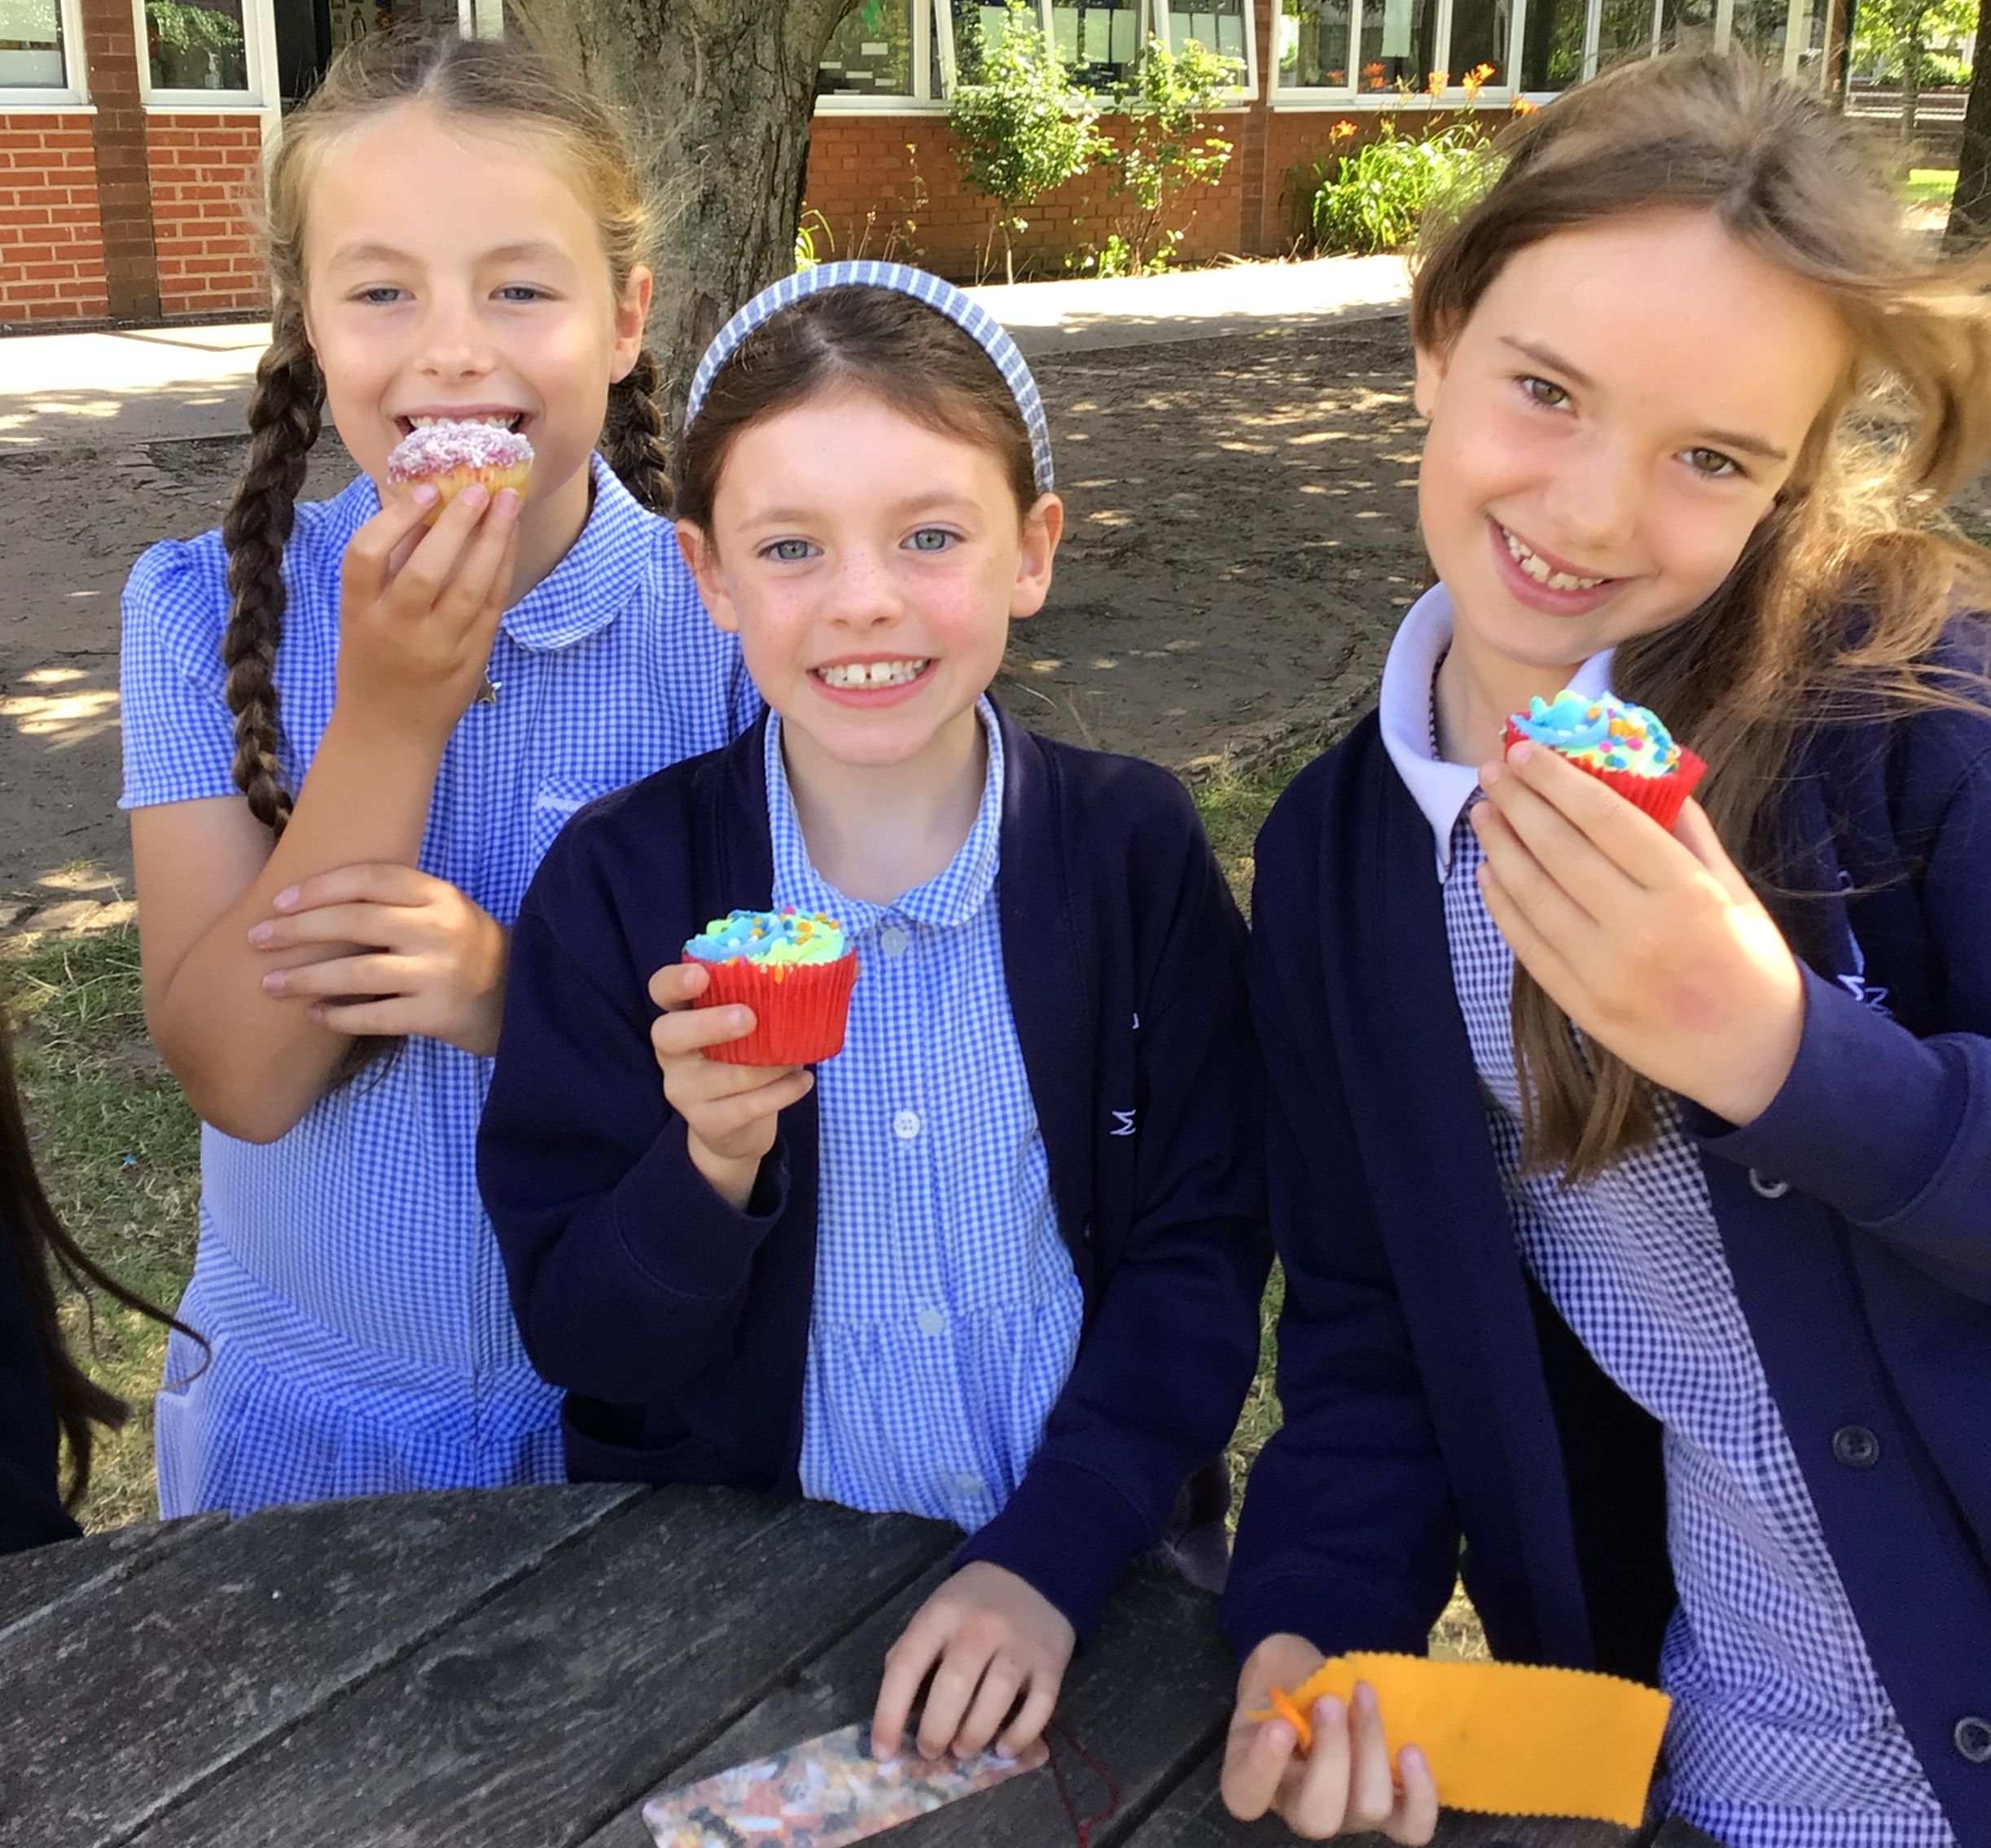 Kind-hearted young bakers at Larkfield Primary School in Southport have hosted a Cake Sale to help improve the Botanic Gardens in Churchtown